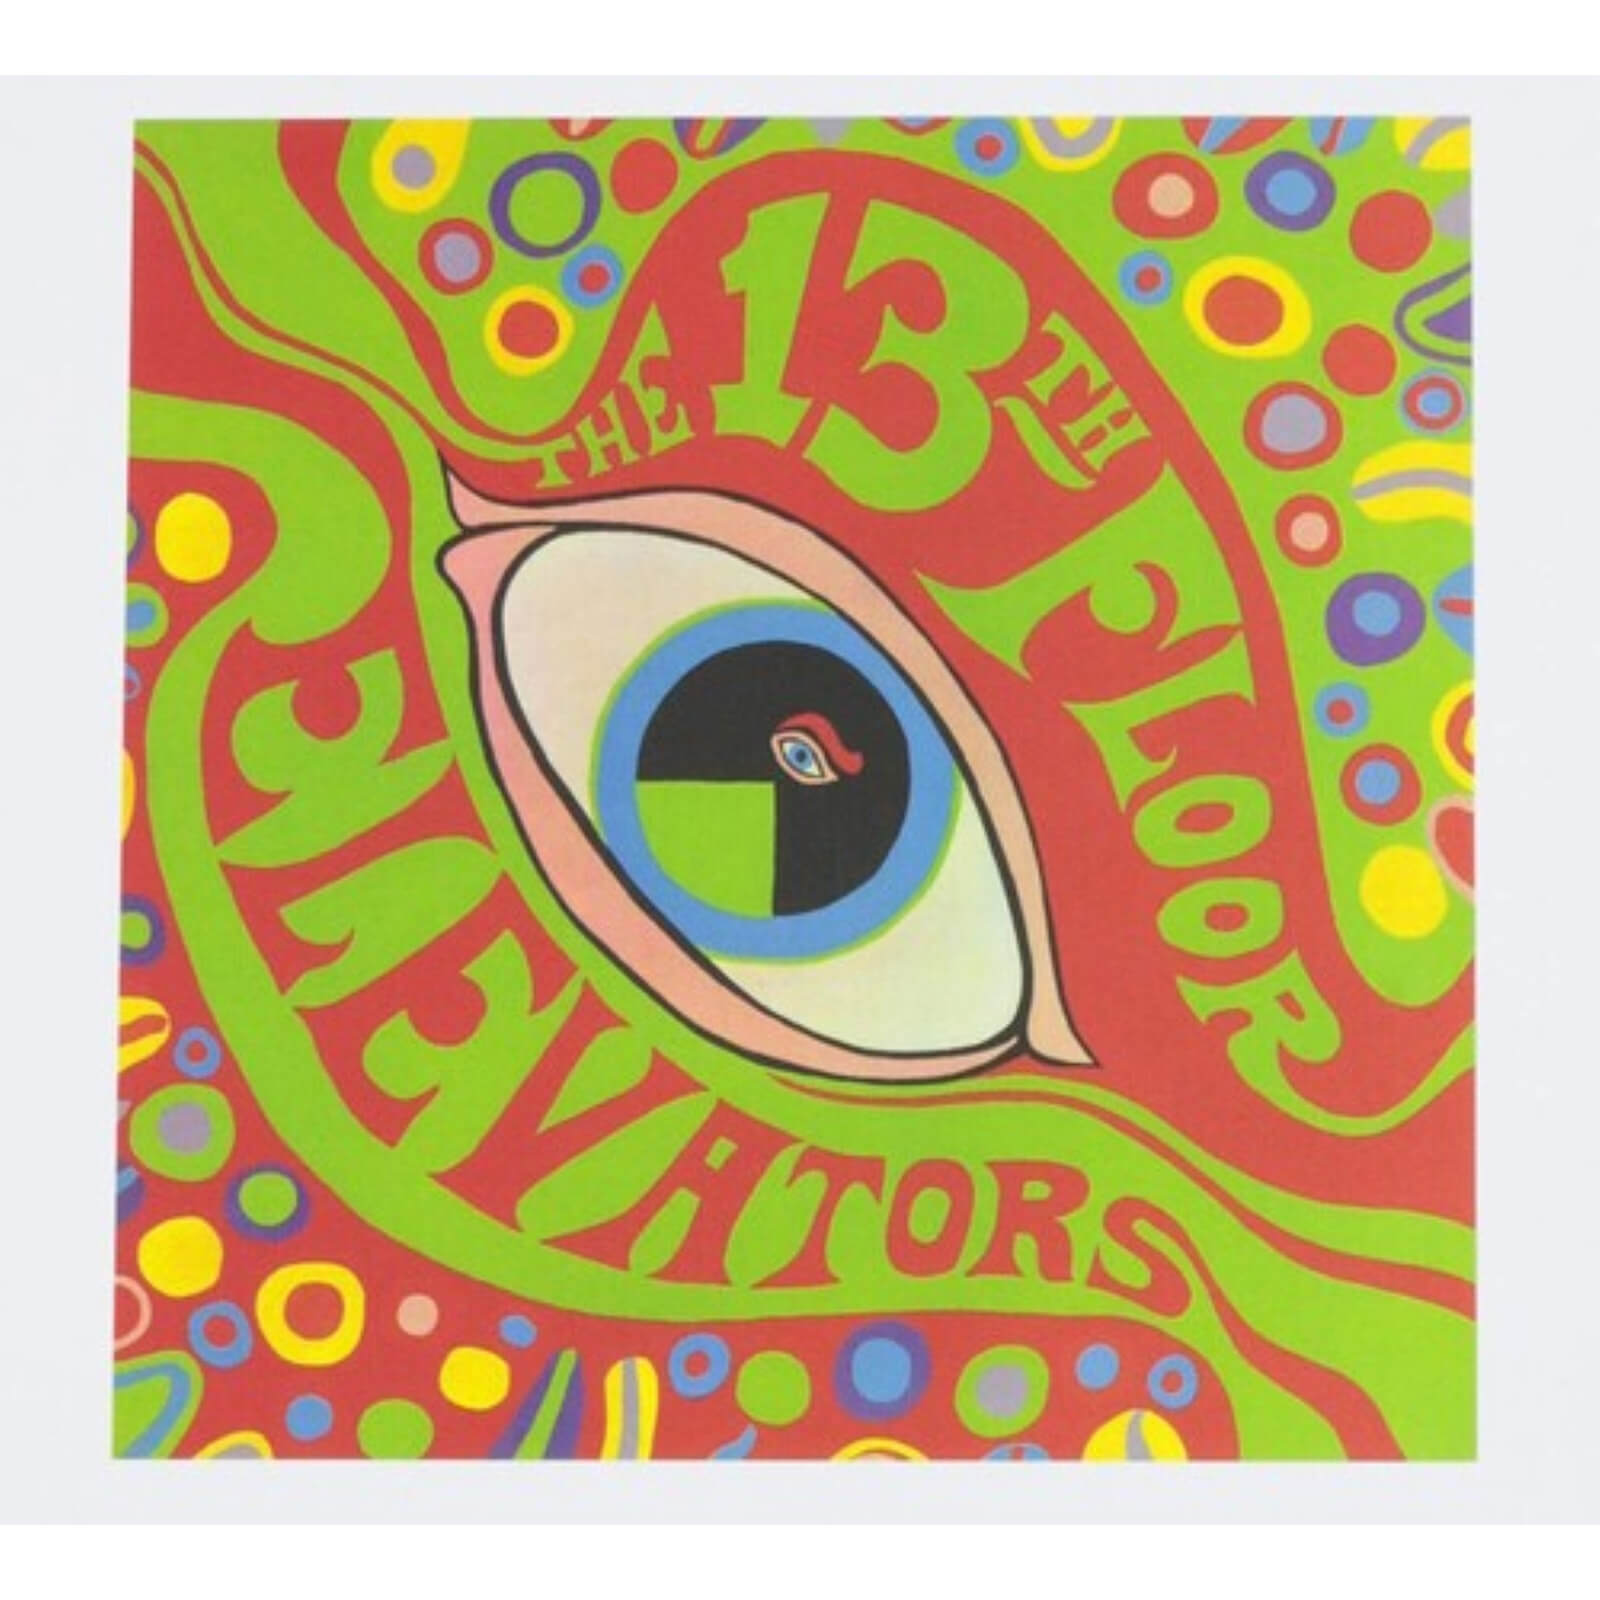 The 13th Floor Elevators - The Psychedelic Sounds Of The 13th Floor Elevators Vinyl 2LP (Red & Green)